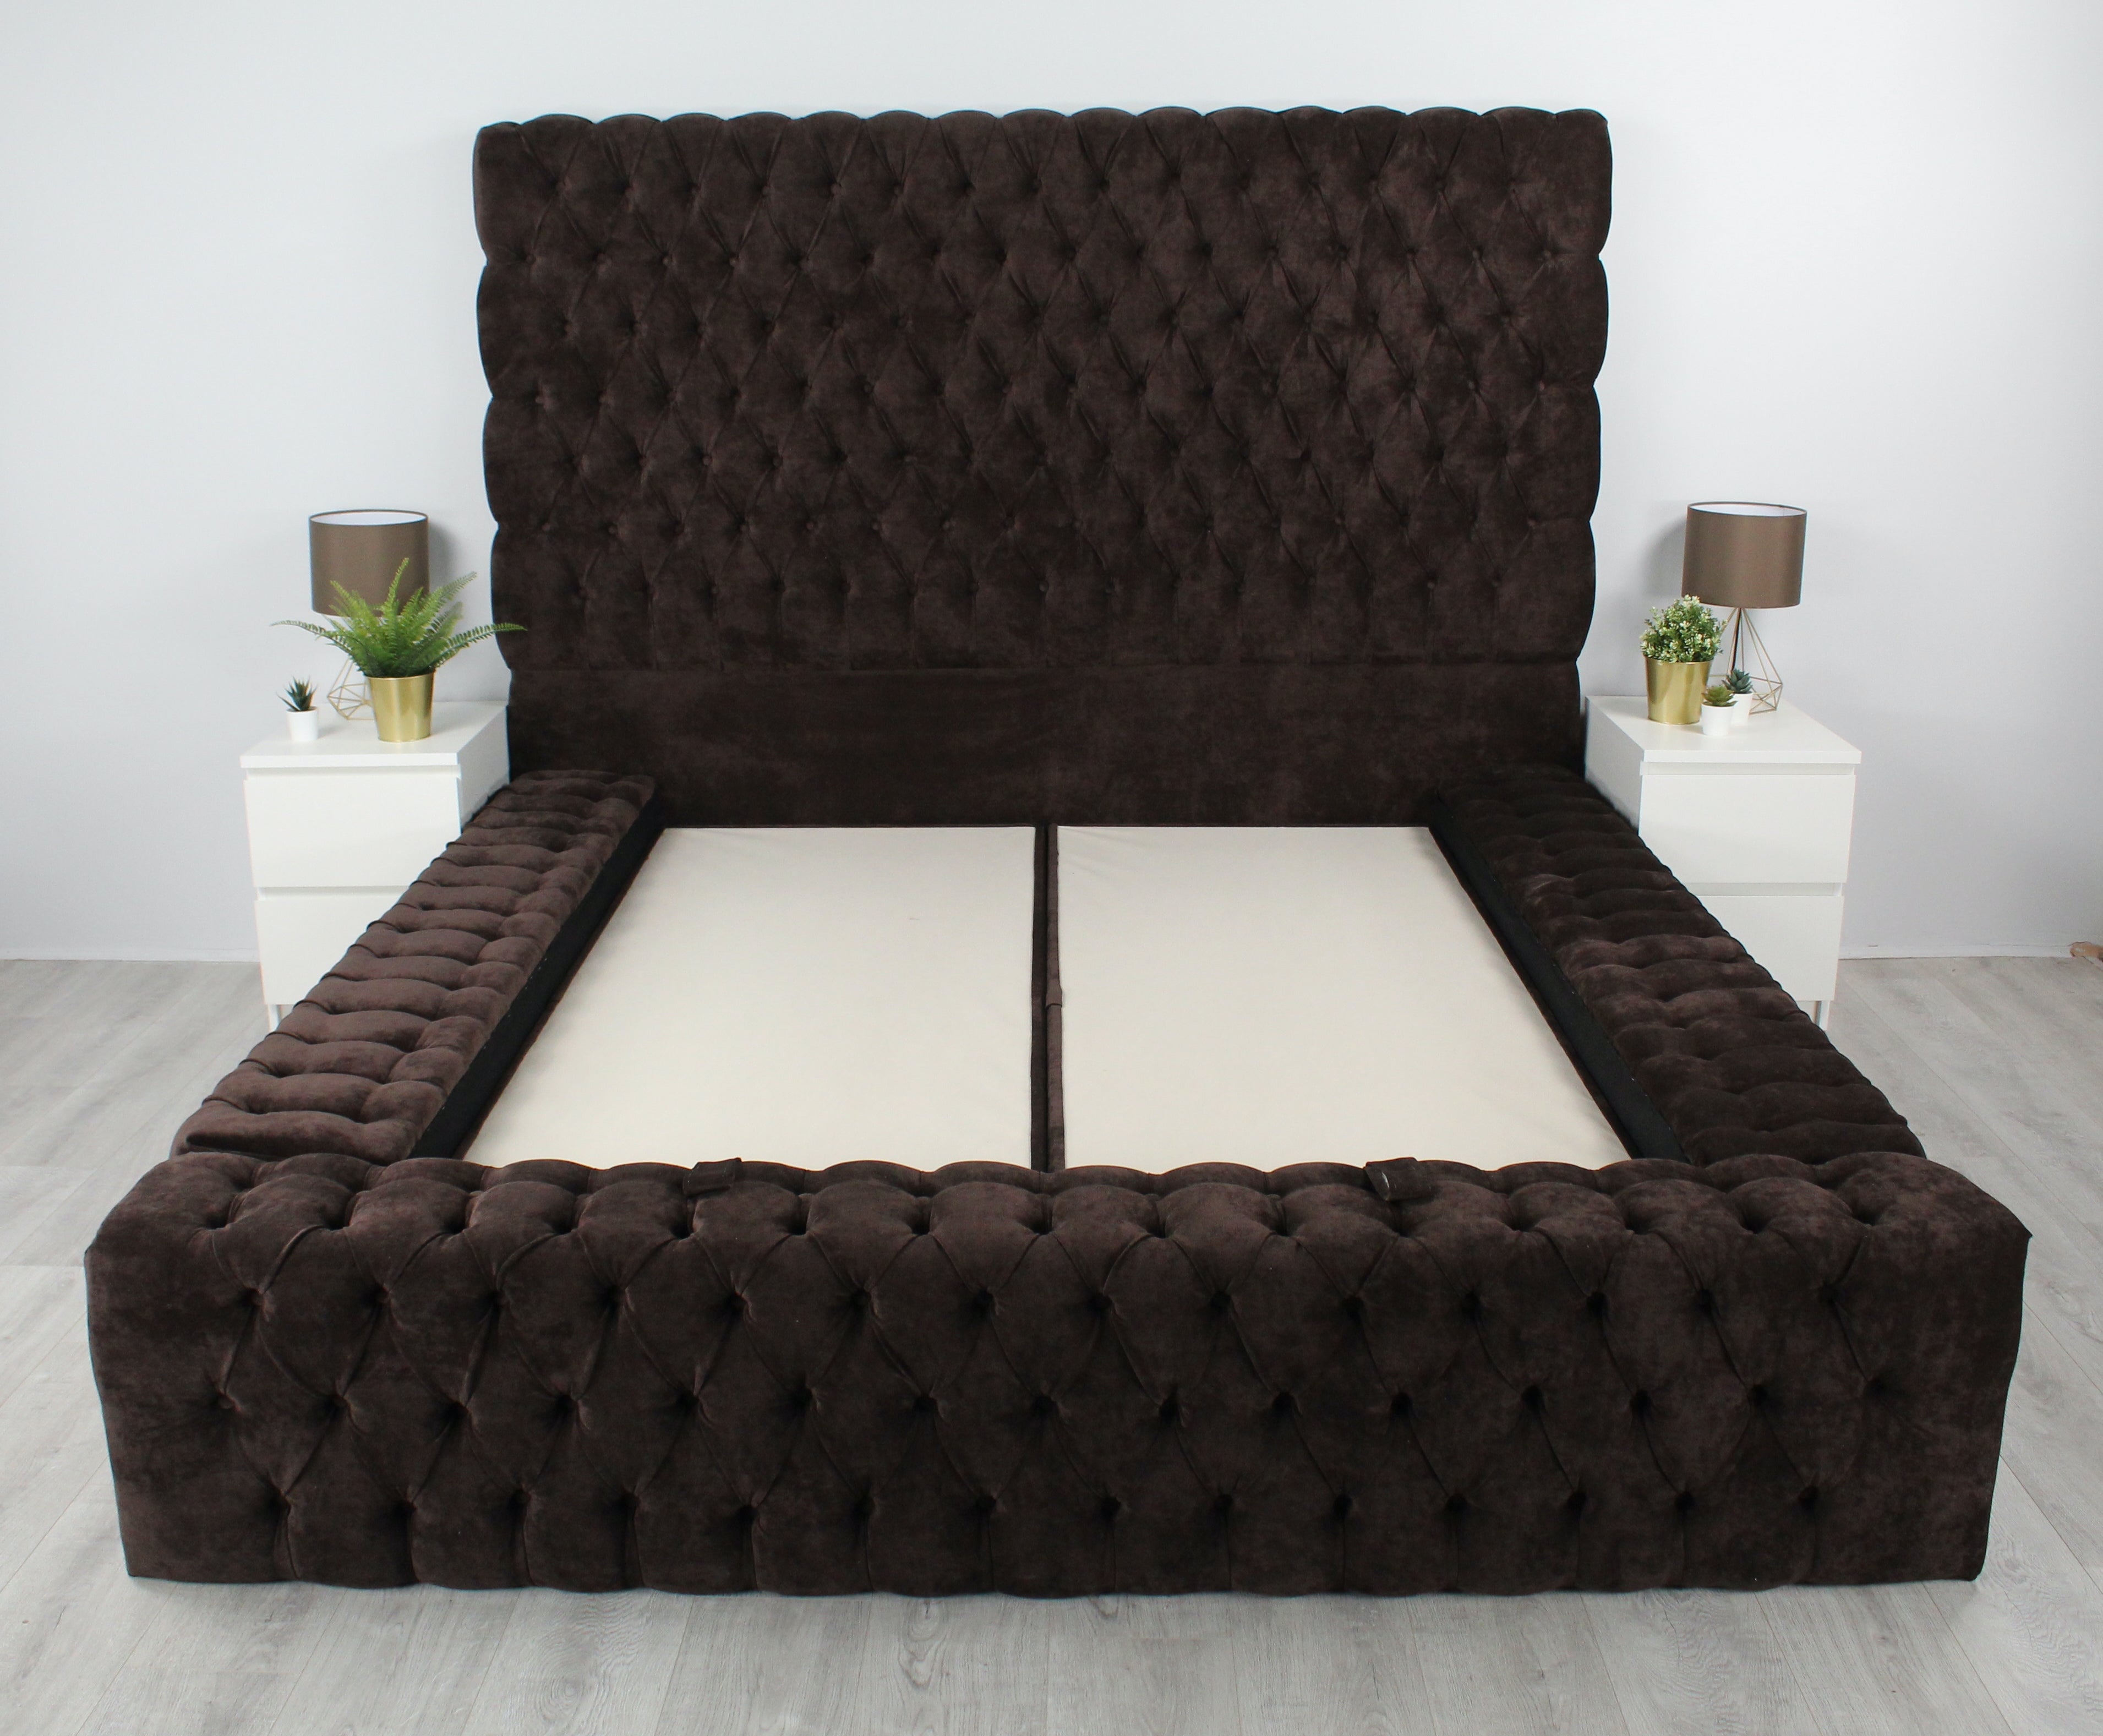 Moscow Luxury Ambassador Bed from Barron Beds